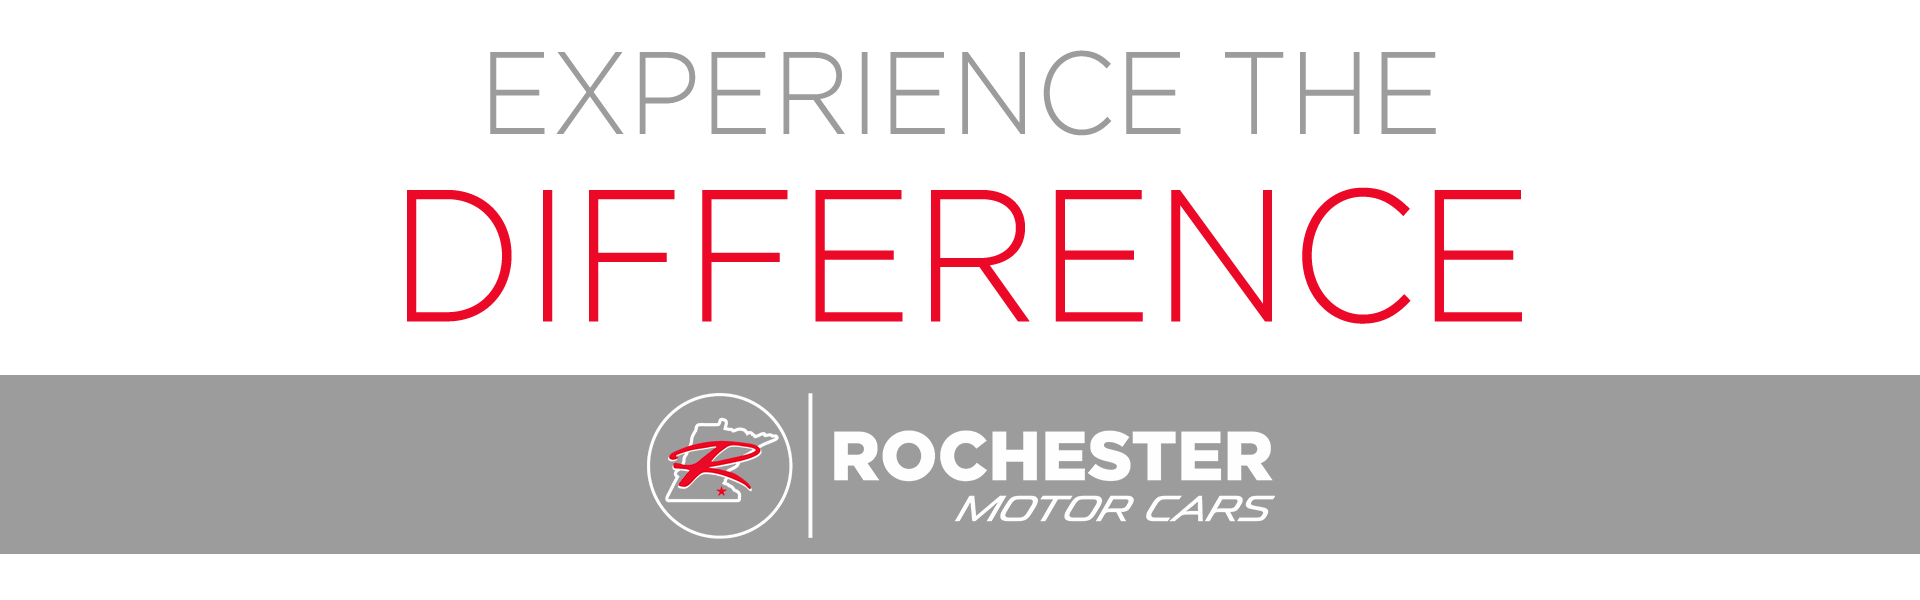 Experience the Difference at Rochester Motor Cars in Rochester MN